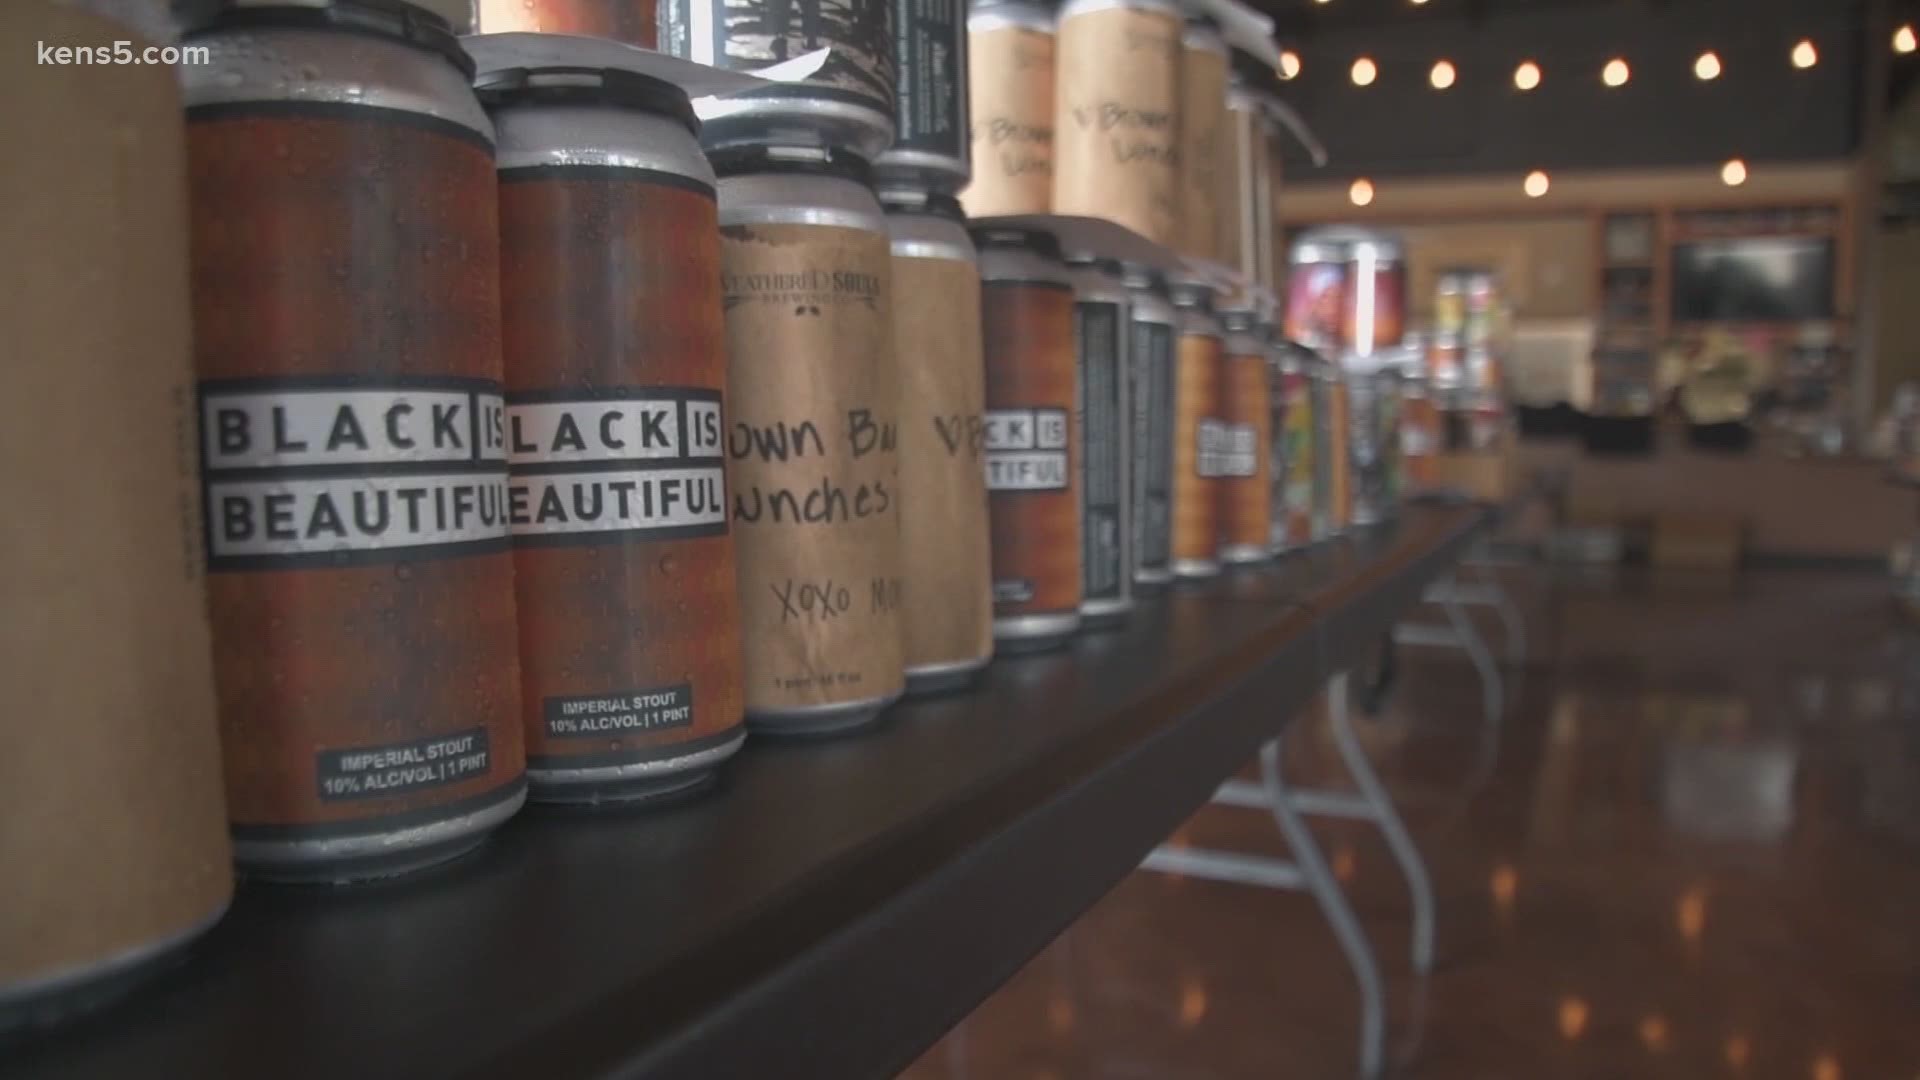 The "Black is Beautiful" beer has been an international success for a Texas brewing company. All money from its sales go towards lifting up Black people.